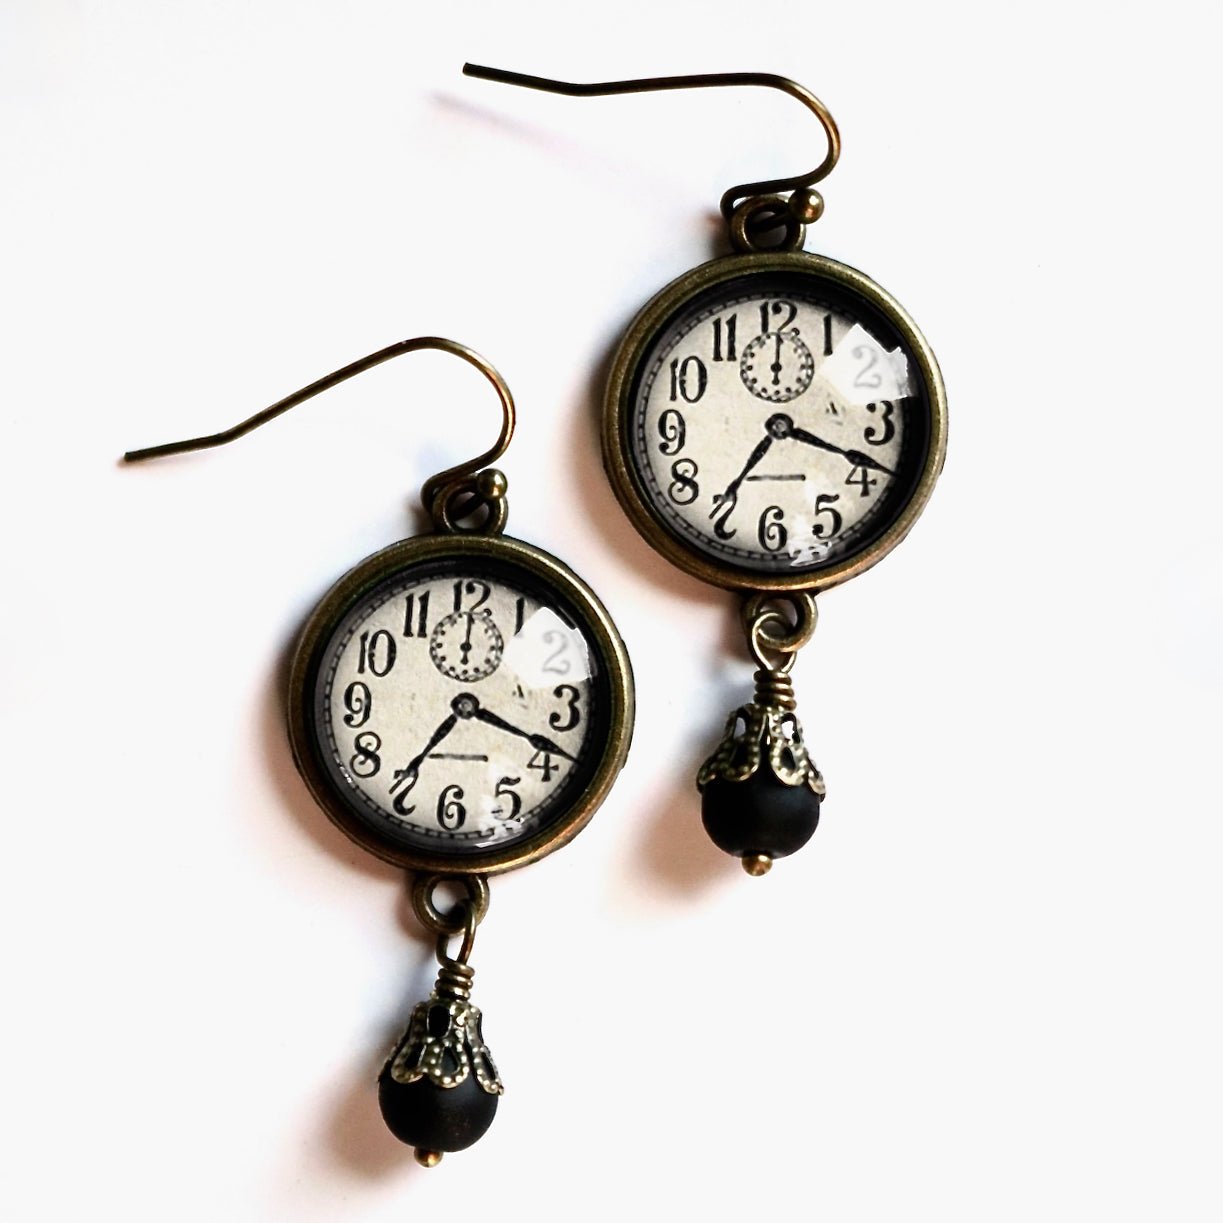 Vintage-Style Cottage Core Edwardian Clock Face Earrings for Pierced Ears - Marmalade Mercantile